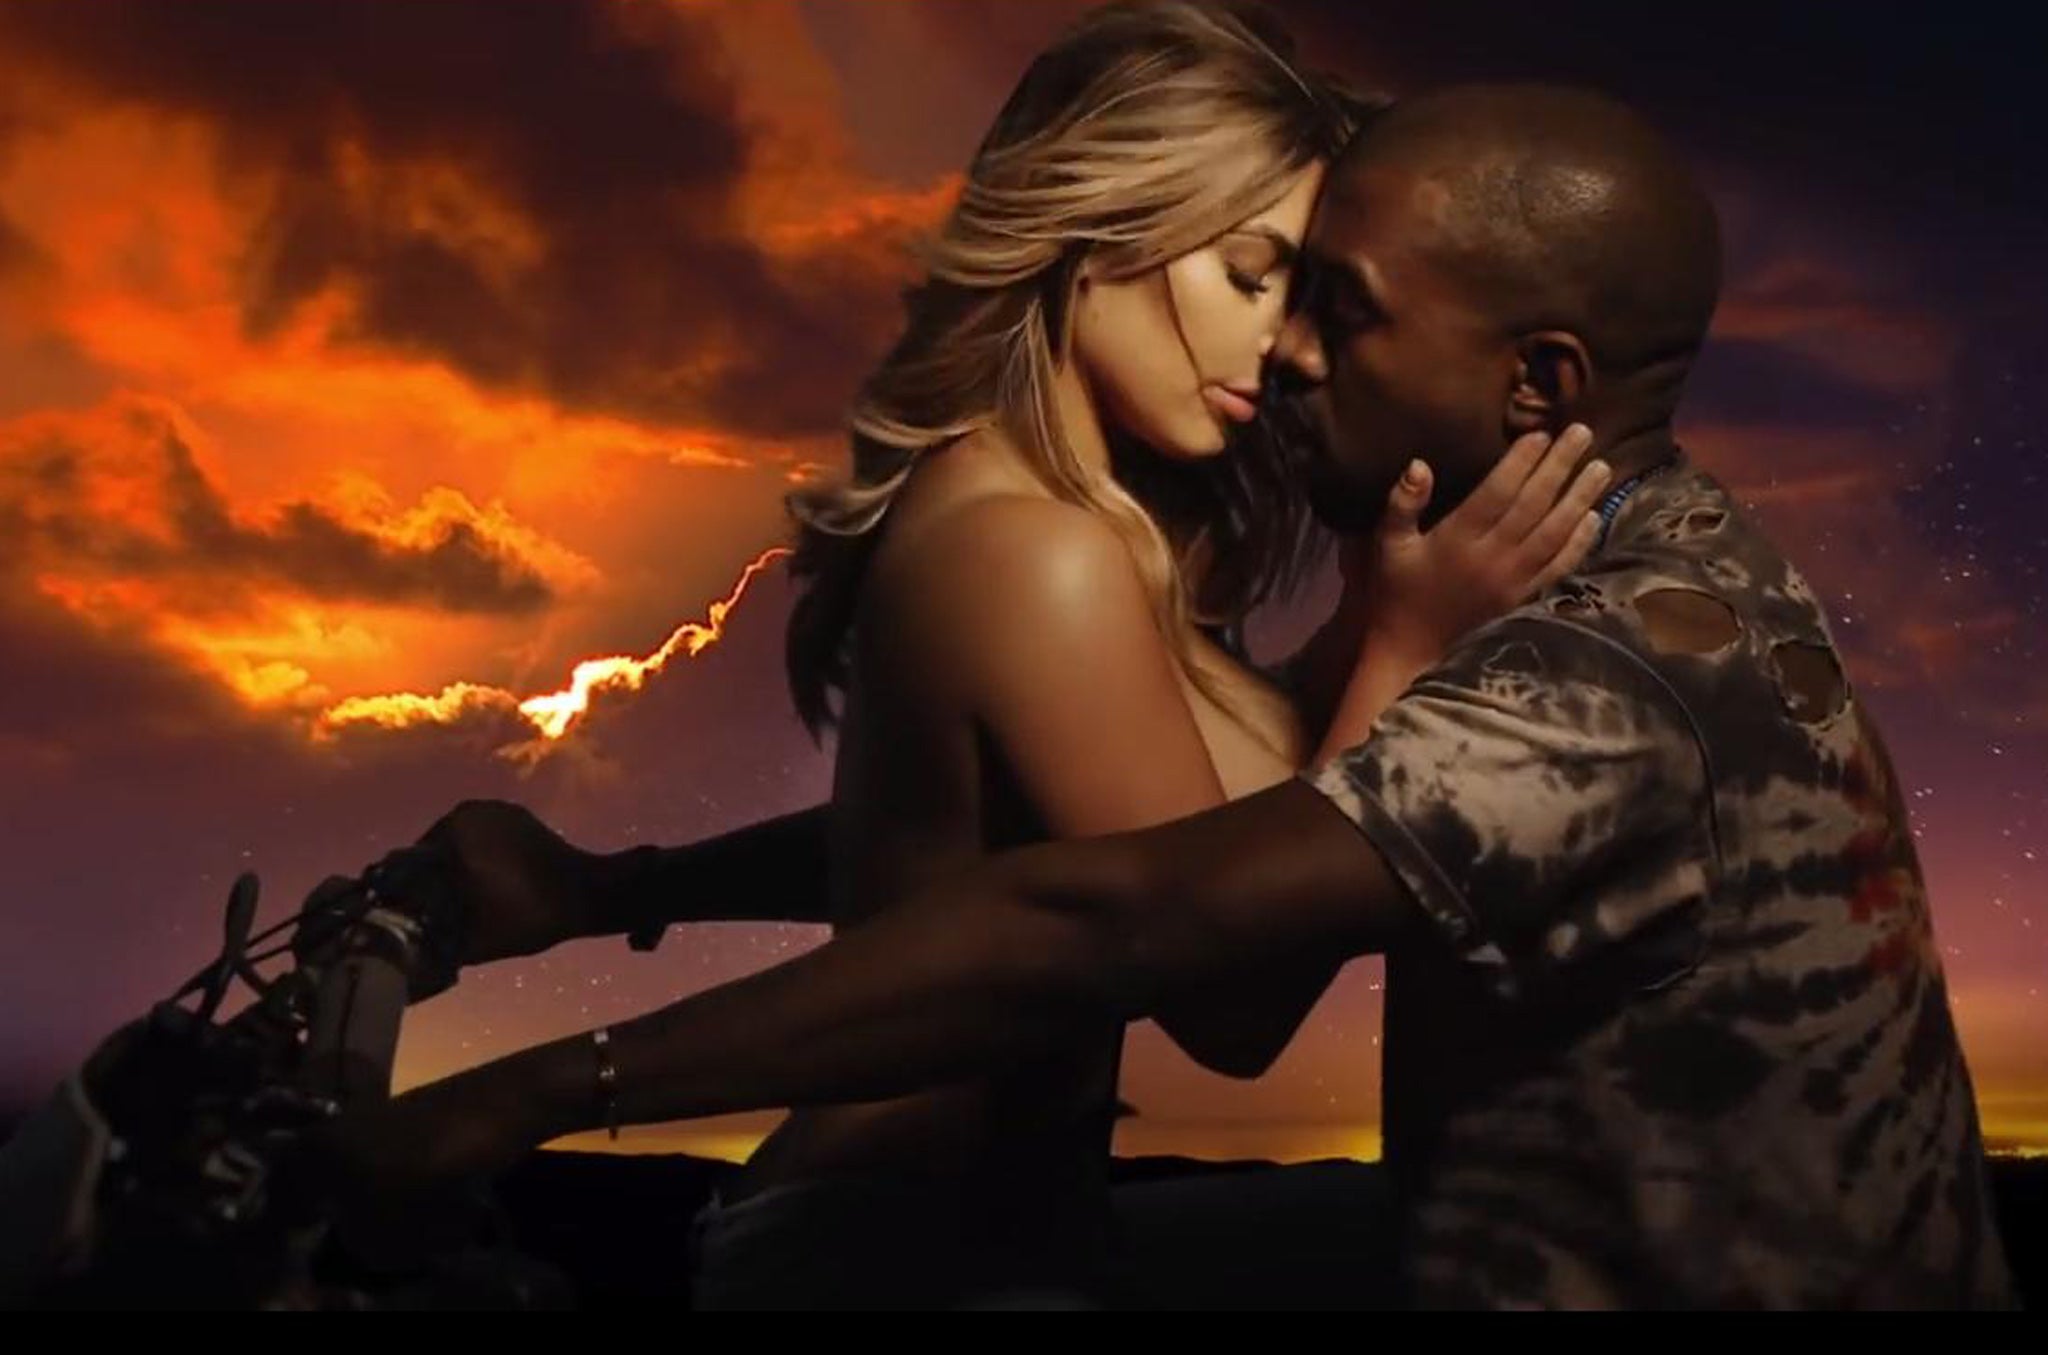 The entertainment world was left flabbergasted after Kanye West debuted his "Bound 2" video, starring Kim Kardashian, last month